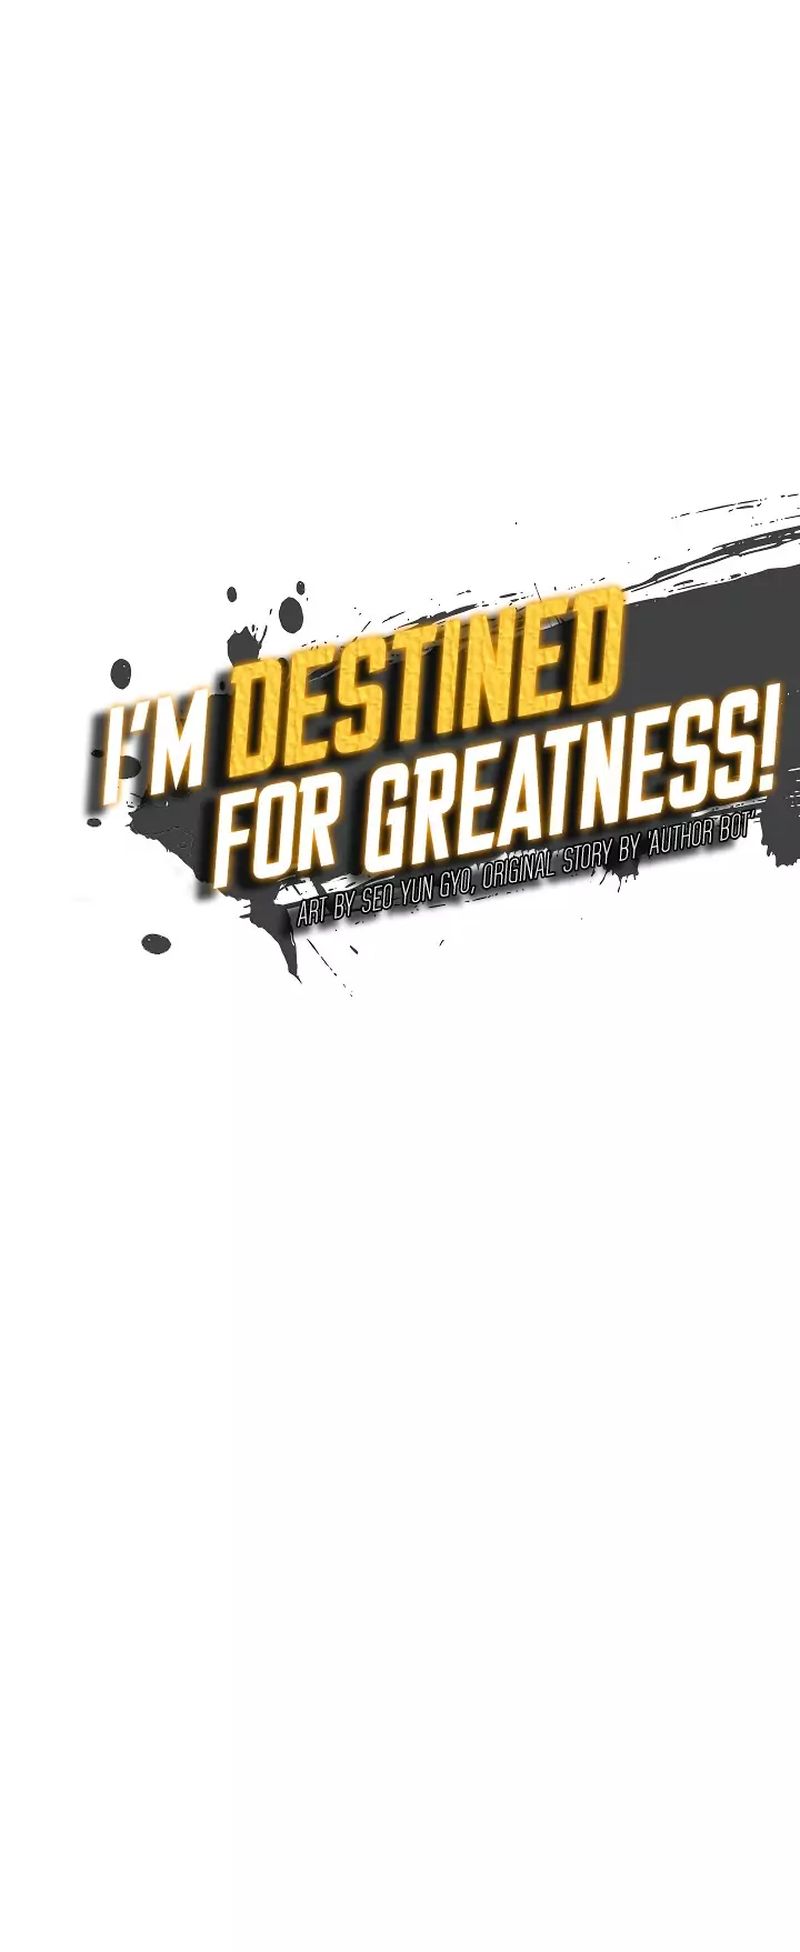 im_destined_for_greatness_32_17